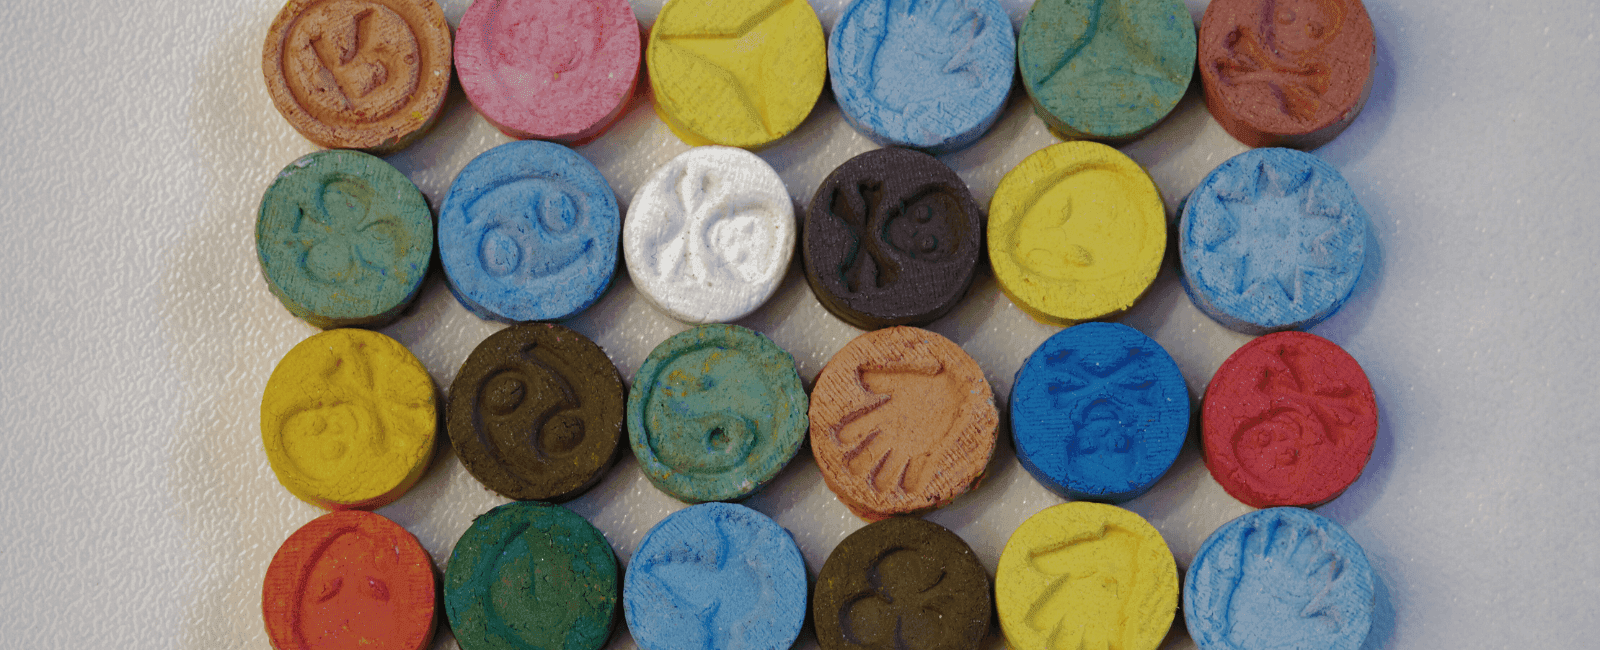 New Study Shows Safety and Efficacy of MDMA-Assisted Therapy for Treating PTSD